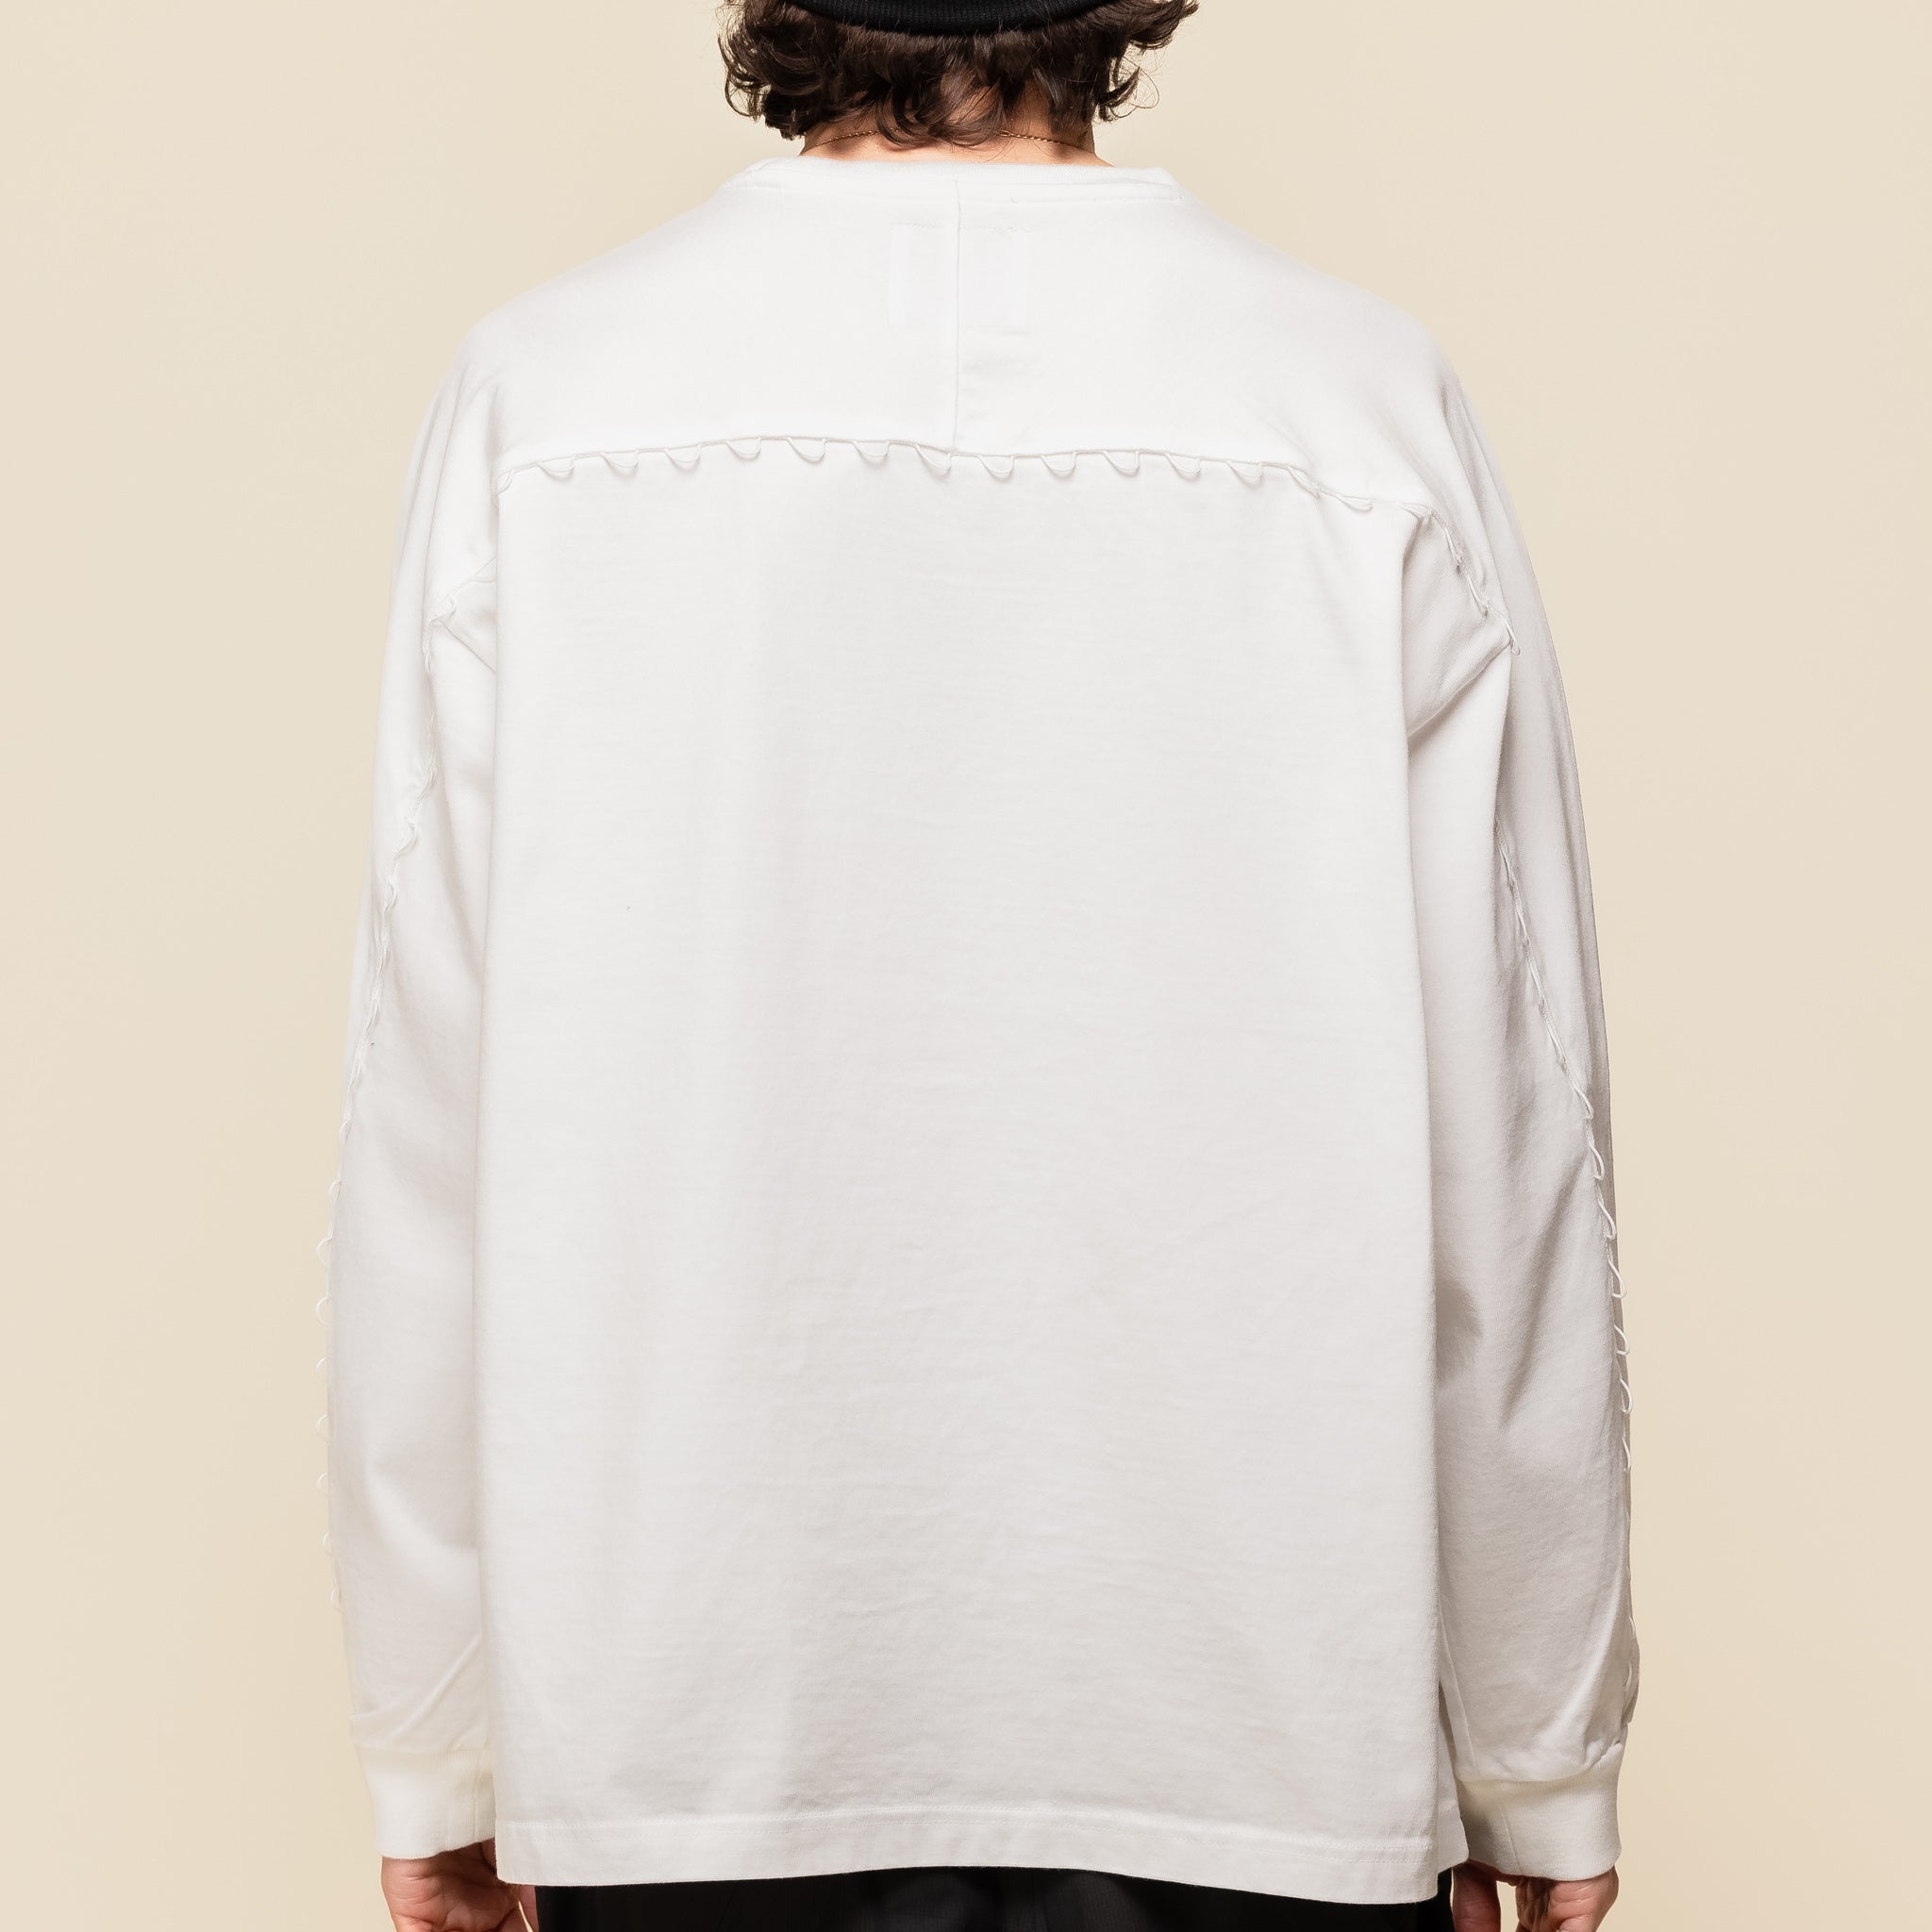 CMF Comfy Outdoor Garment - Heavy Cotton Cord L/S T-Shirt - White